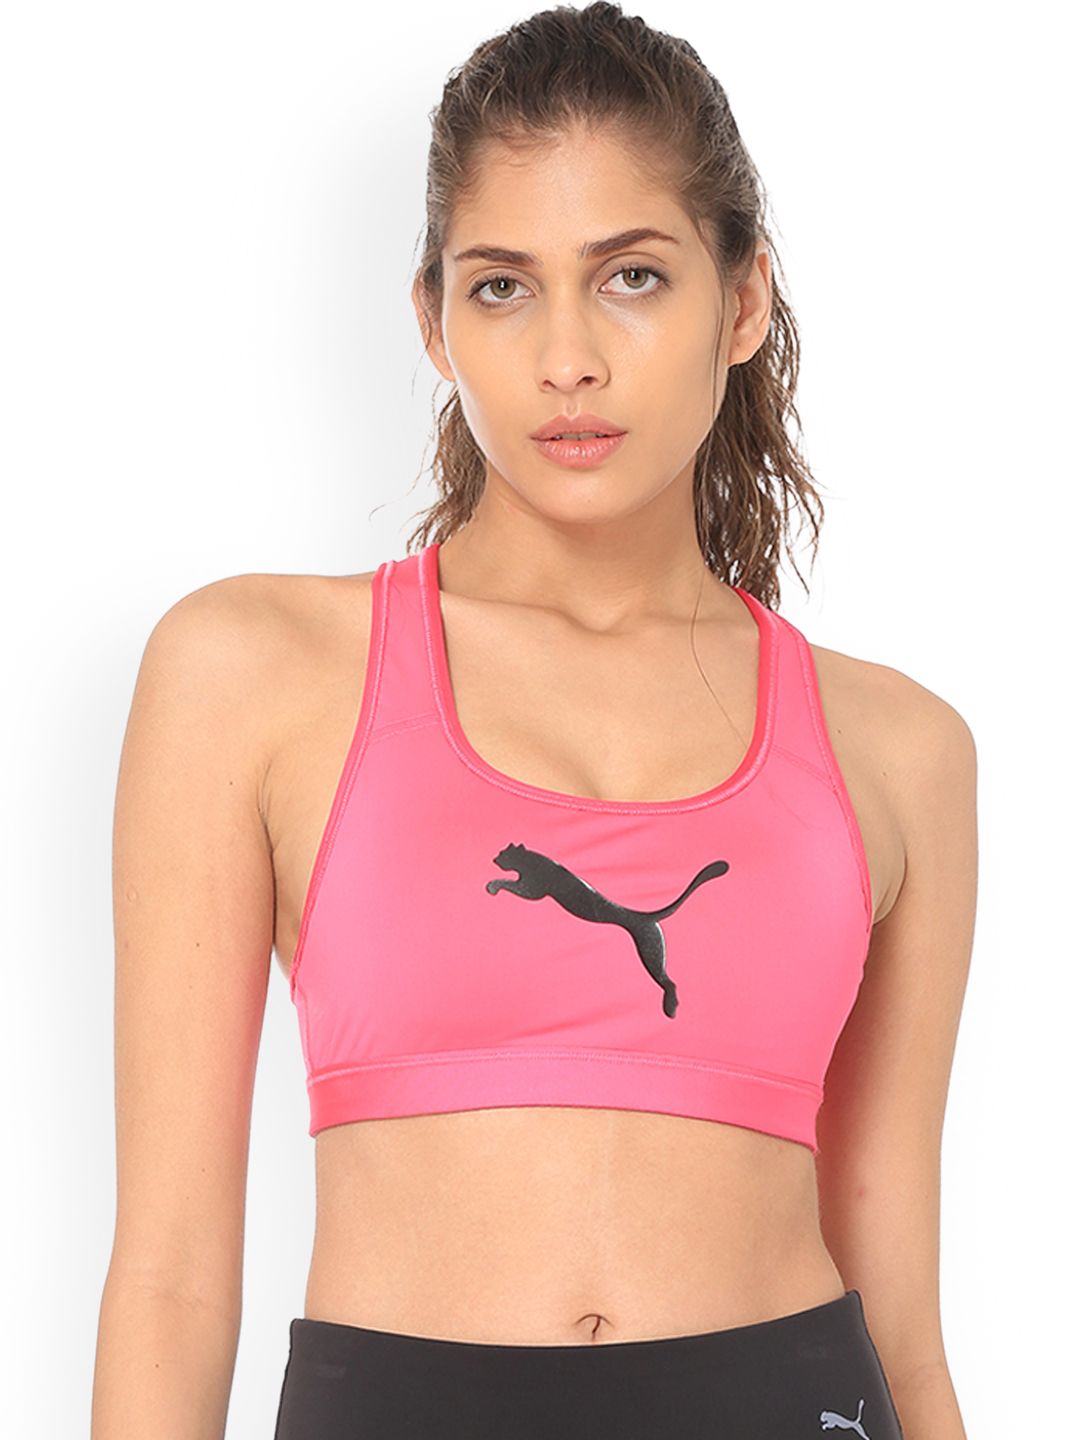 Puma Pink Printed Non-Wired Lightly Padded Sports Bra 51699814 Price in India